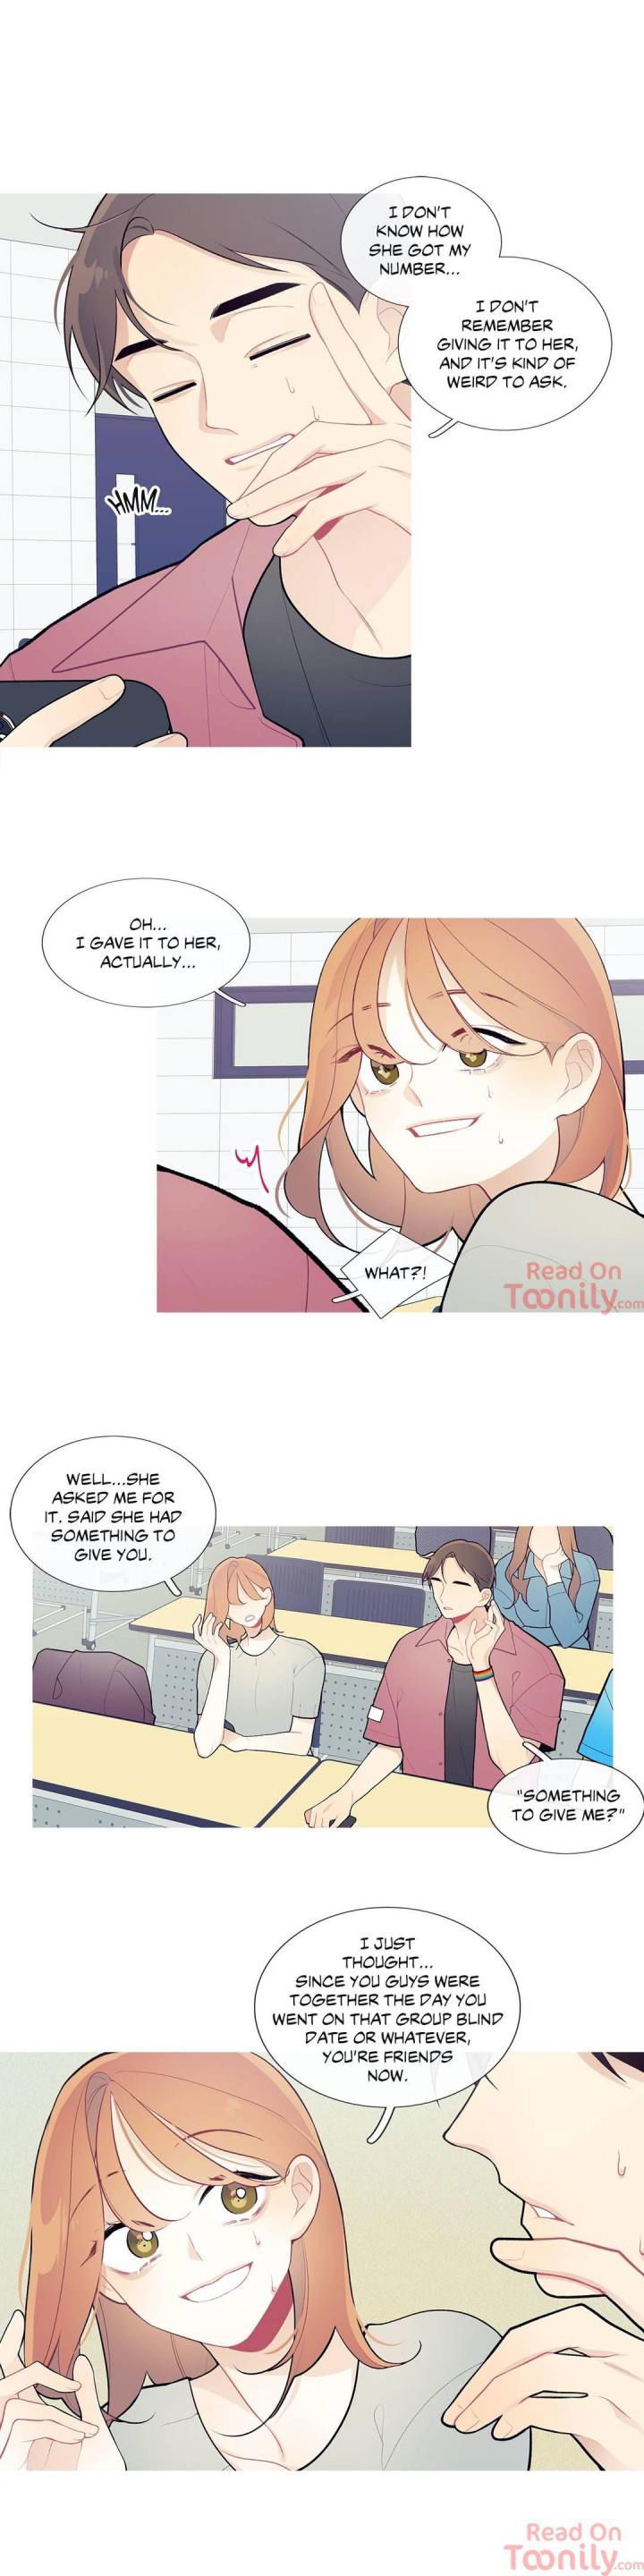 whats-going-on-chap-32-1